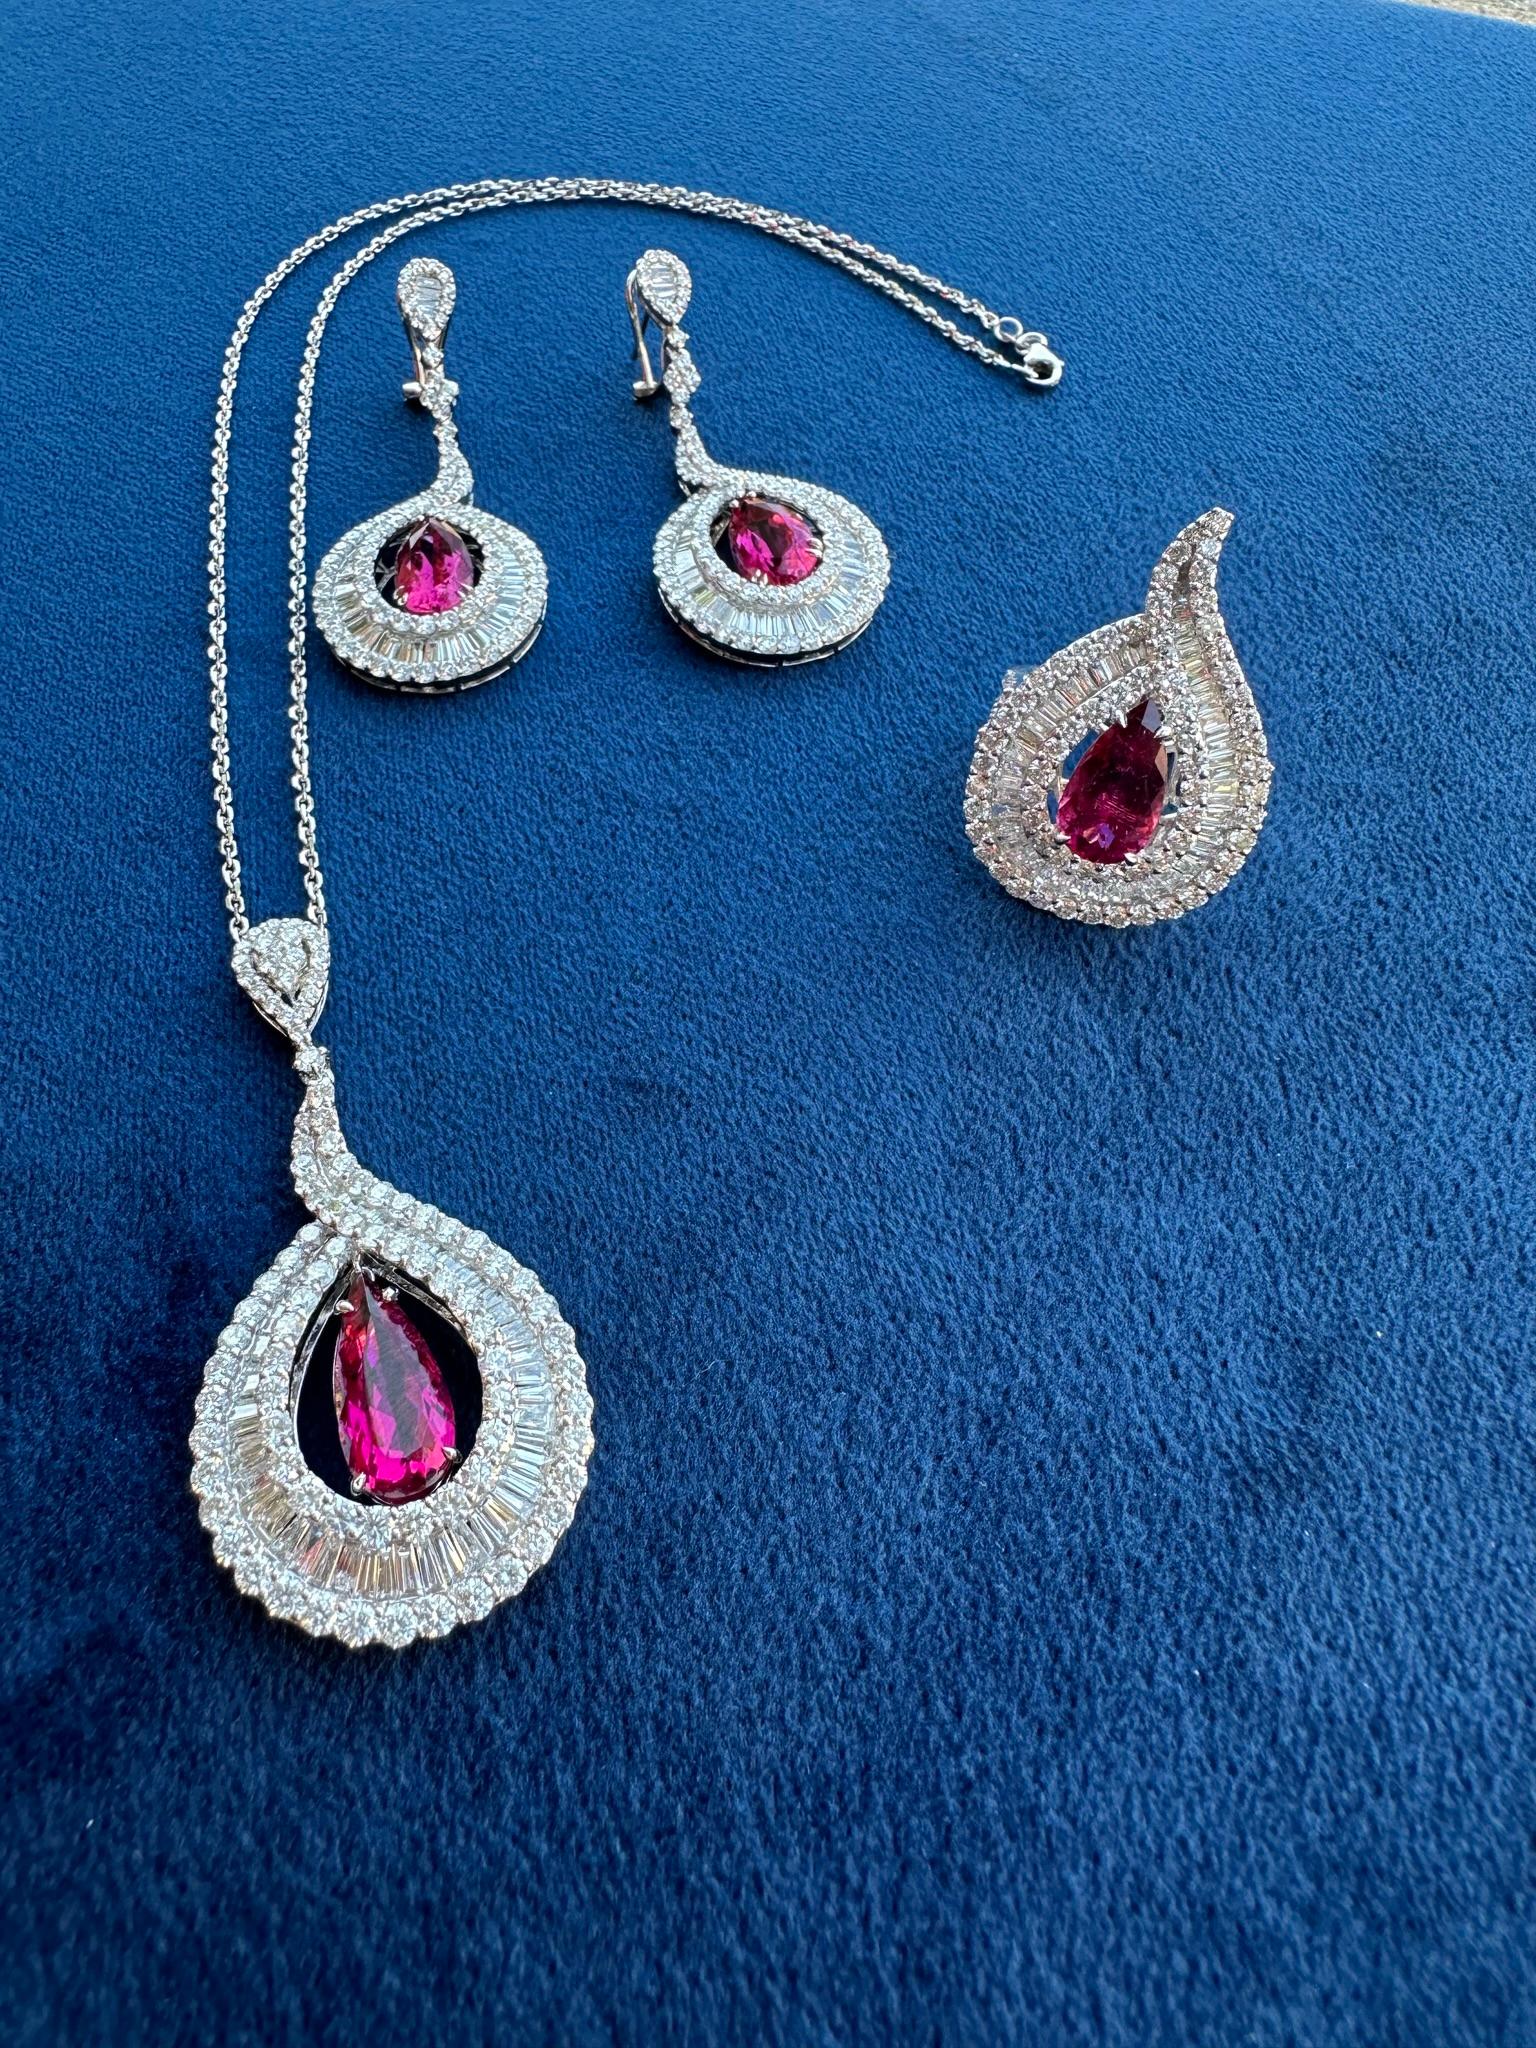 Magnificent Pair of 18.08 Carat Rubellite & Diamond 18K White Gold Drop Earrings In Excellent Condition For Sale In Tustin, CA